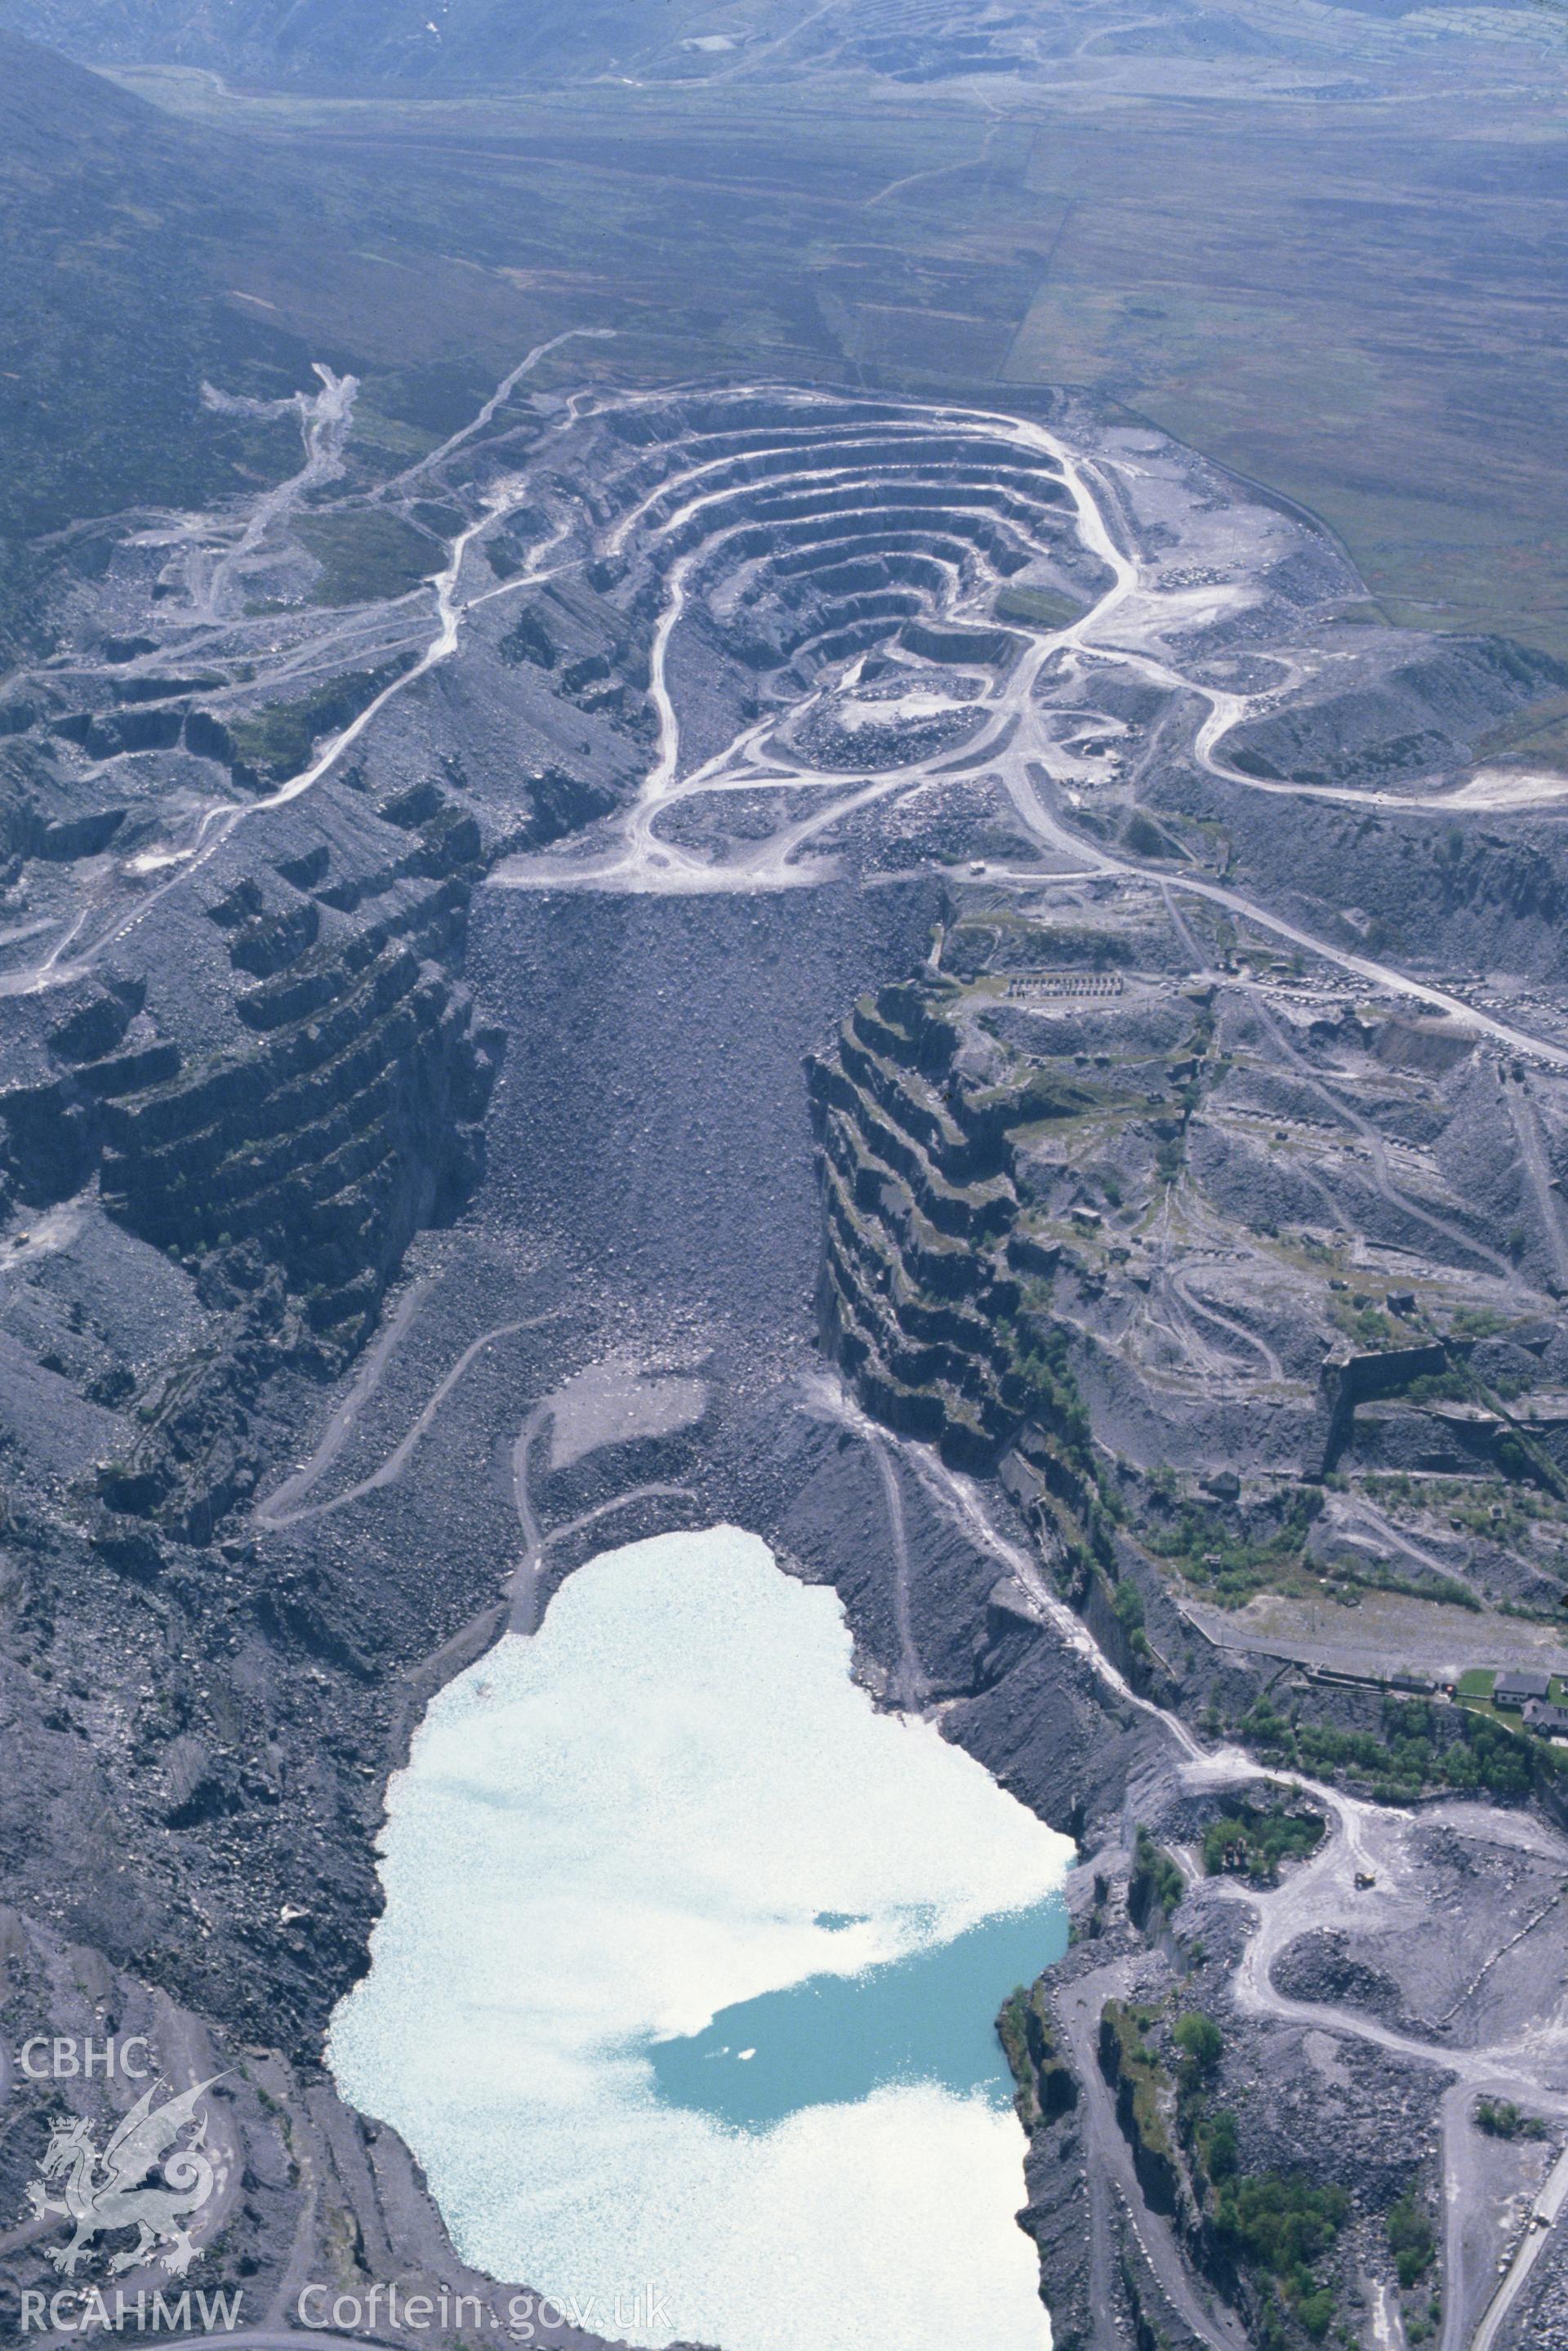 Slide of RCAHMW colour oblique aerial photograph of Penrhyn Slate Quarry, taken by C.R. Musson, 2/5/1994.